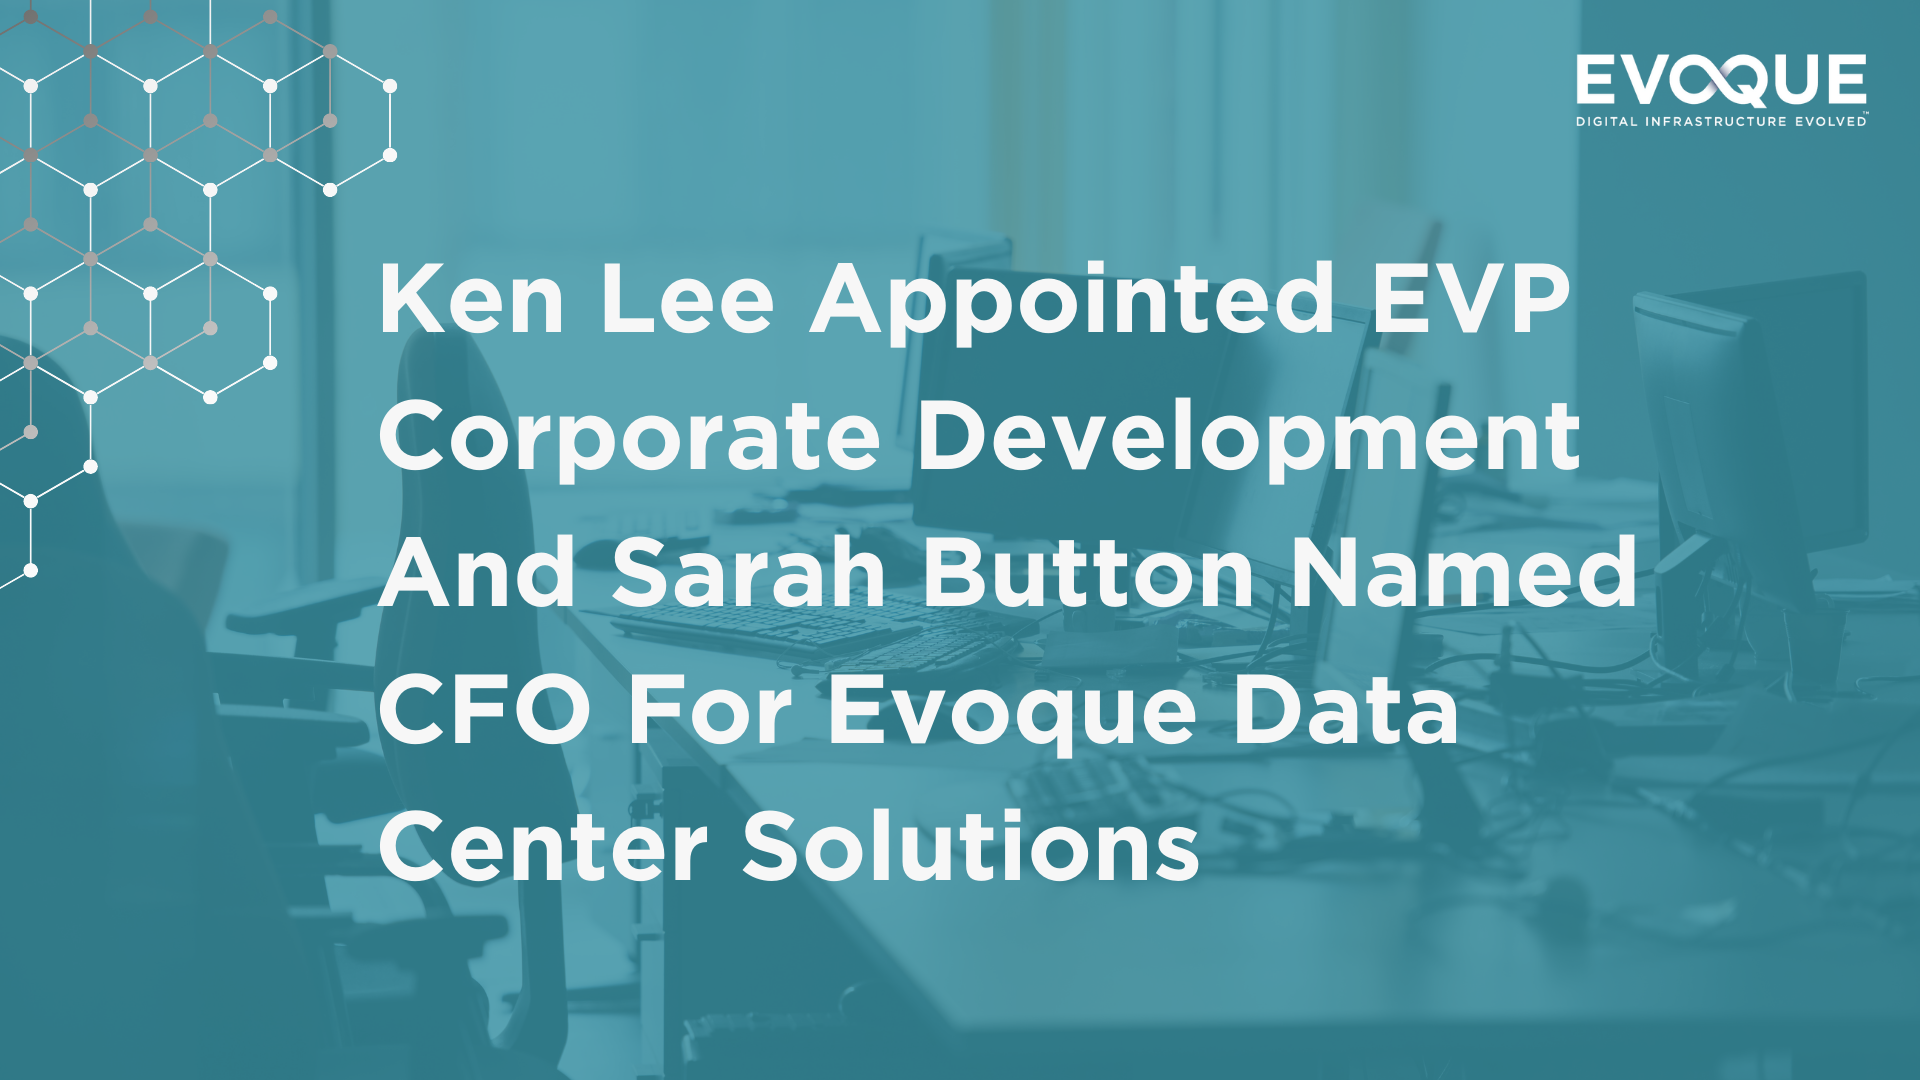 Ken Lee Appointed EVP Corporate Development And Sarah Button Named CFO For Evoque Data Center Solutions™